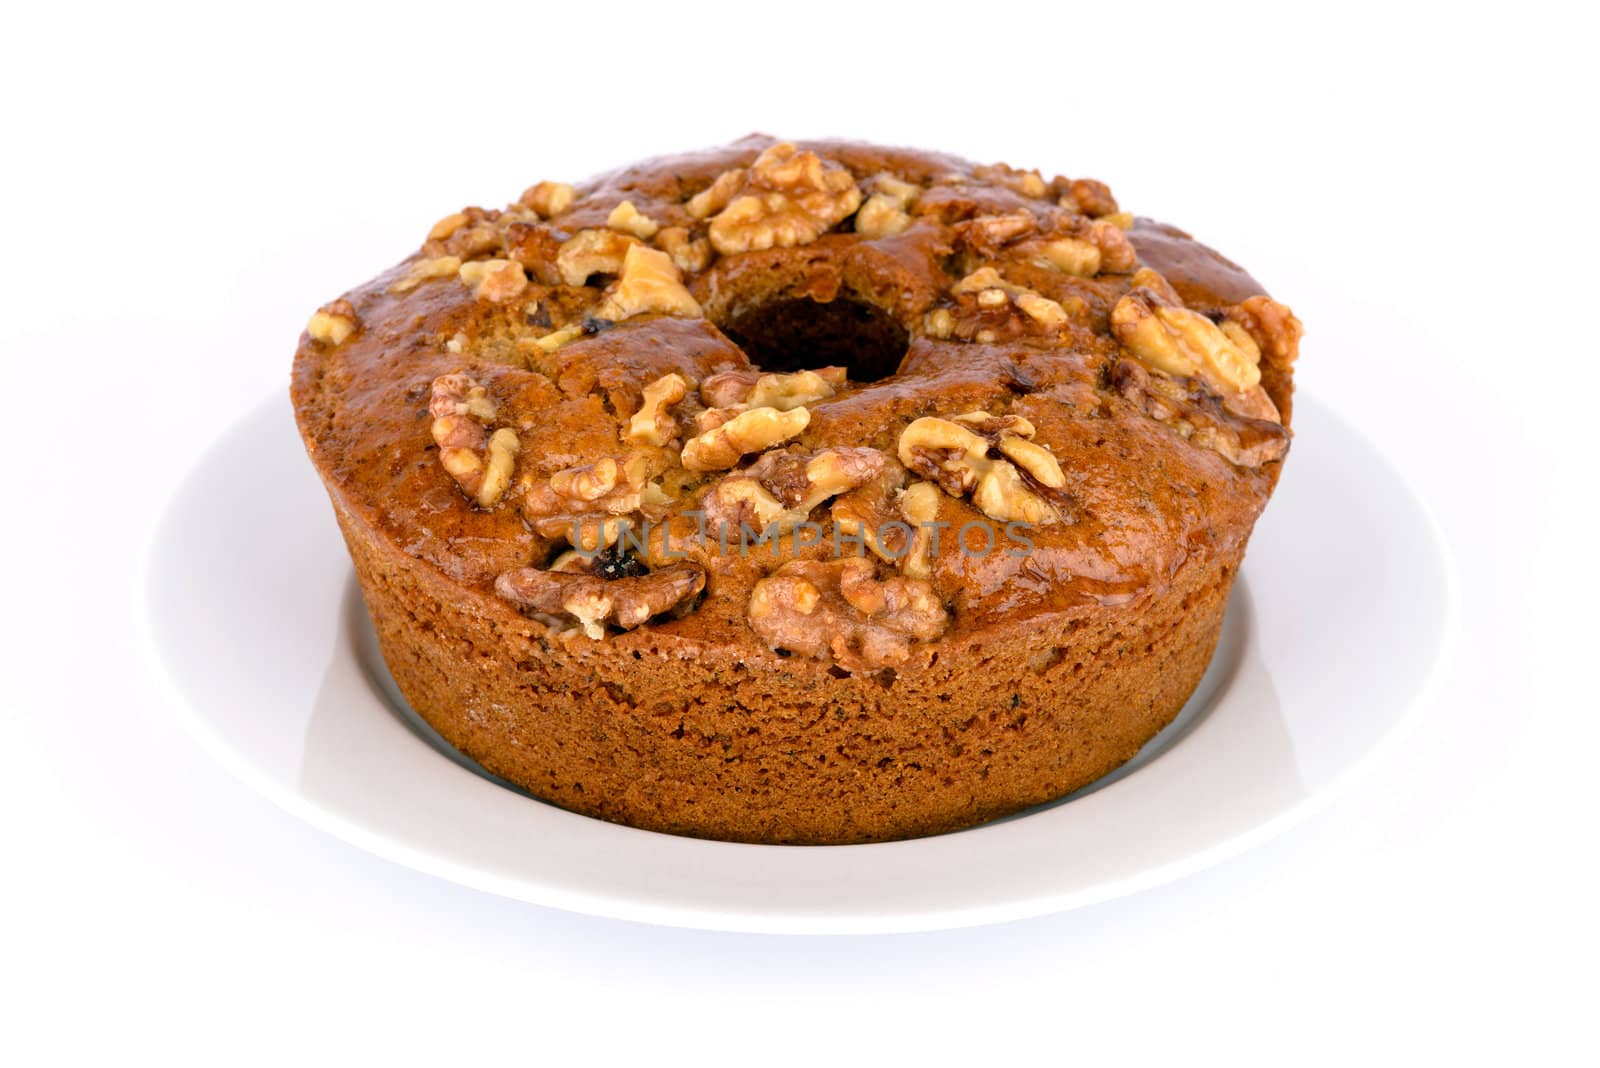 Homemade fresh honey cake with nuts on dish.